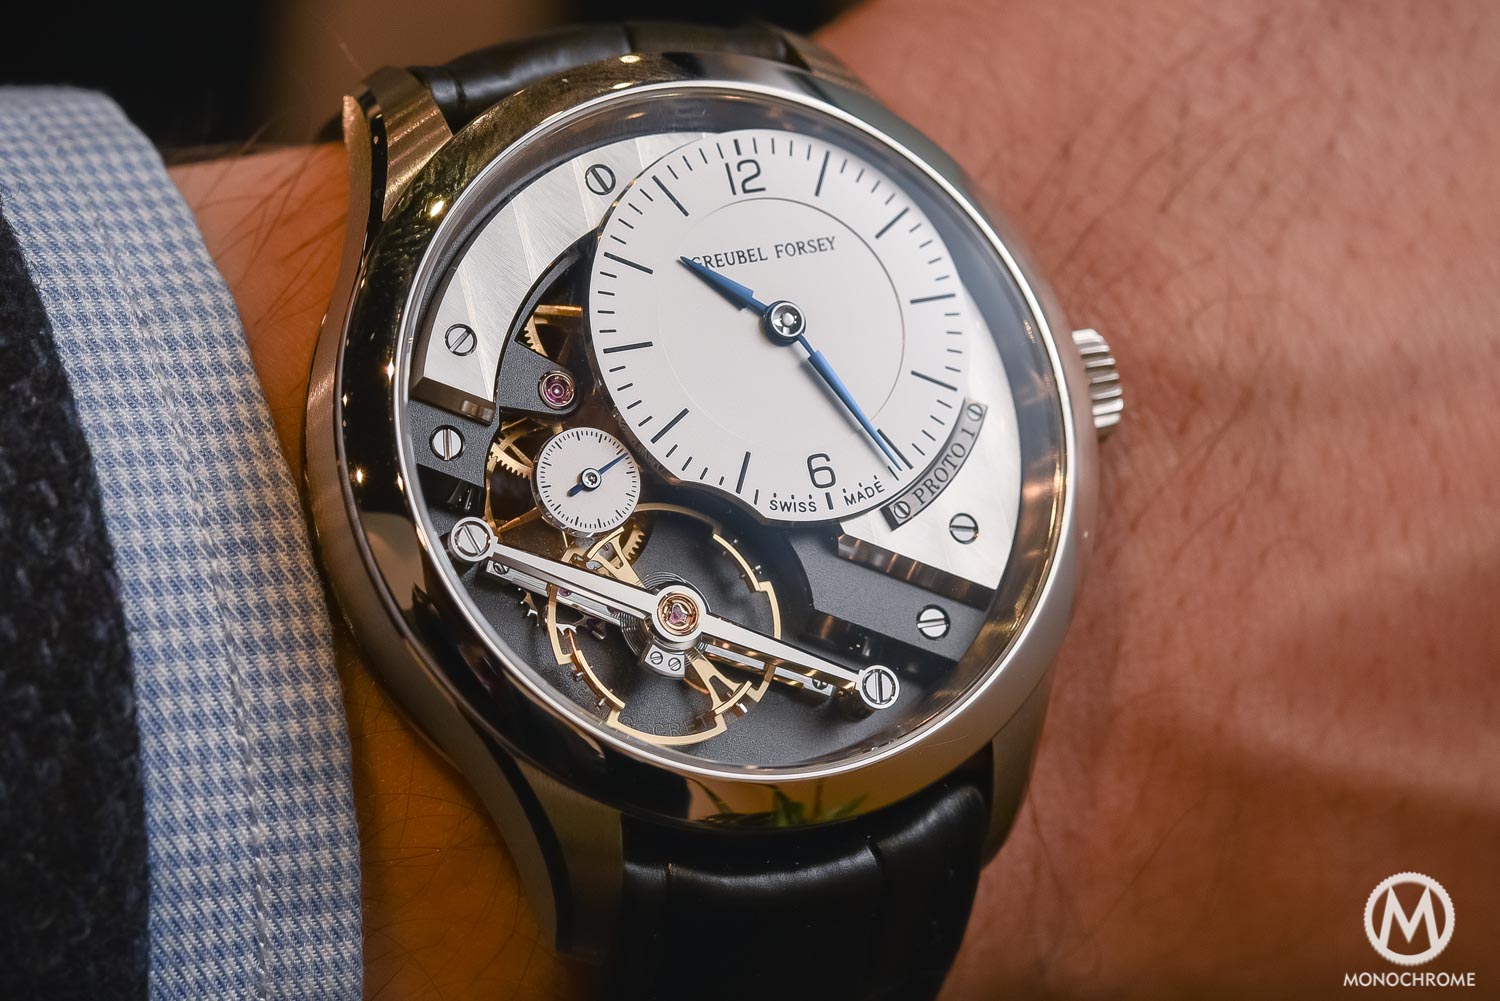 Greubel Forsey Signature 1 - Stainless steel entry level - SIHH 2016 - wristshot